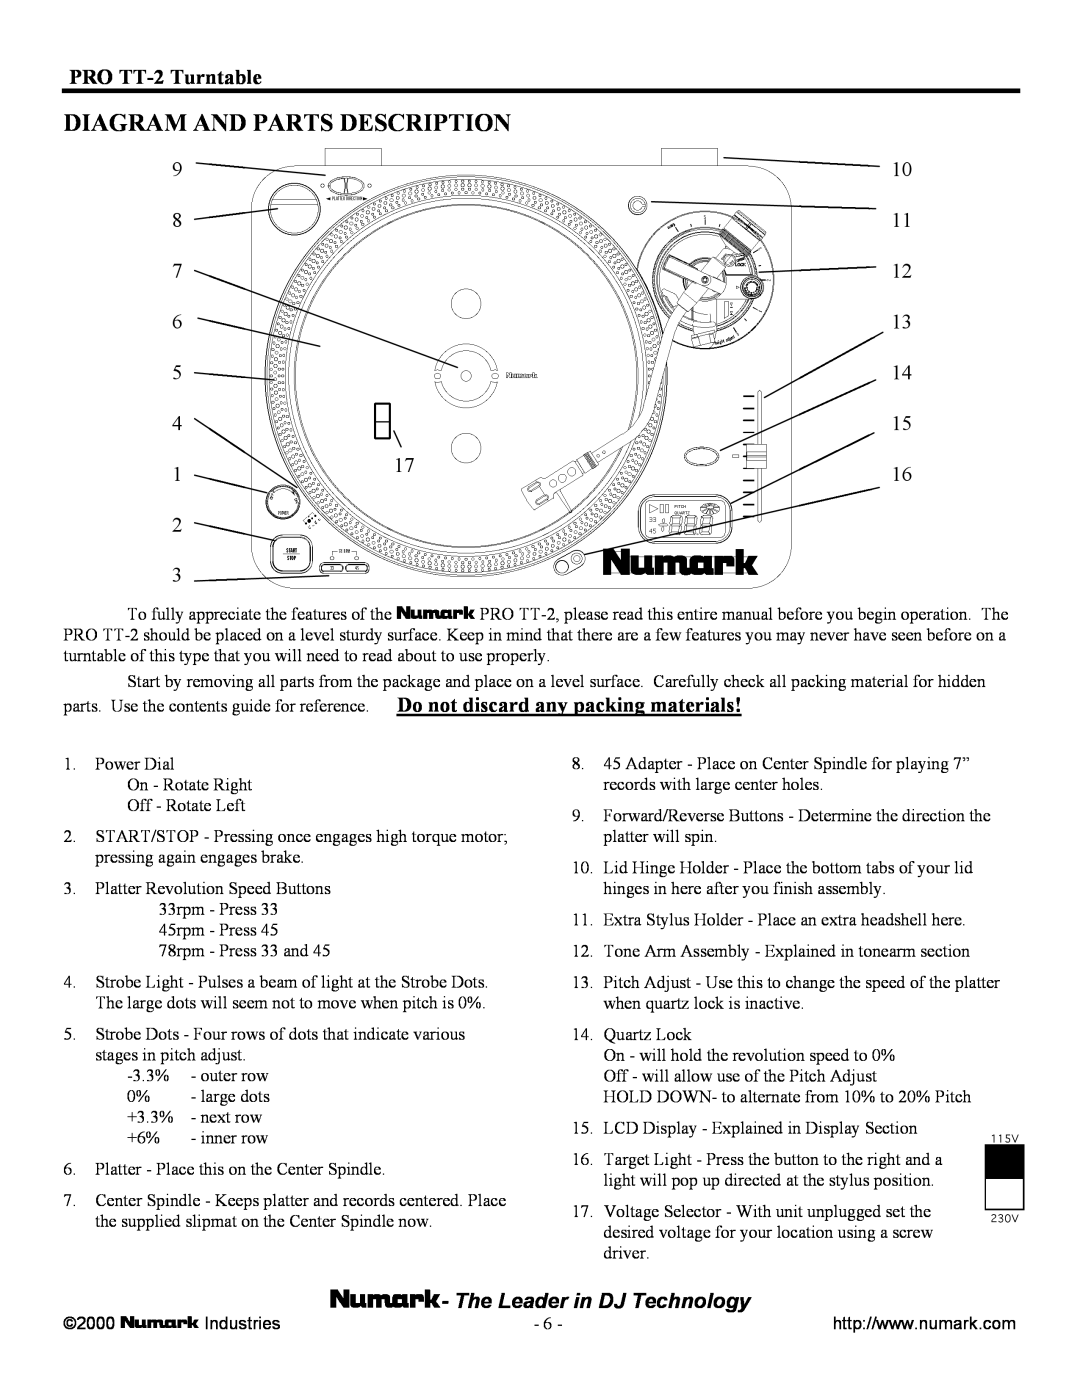 Numark Industries owner manual Diagram And Parts Description, PRO TT-2Turntable, The Leader in DJ Technology 